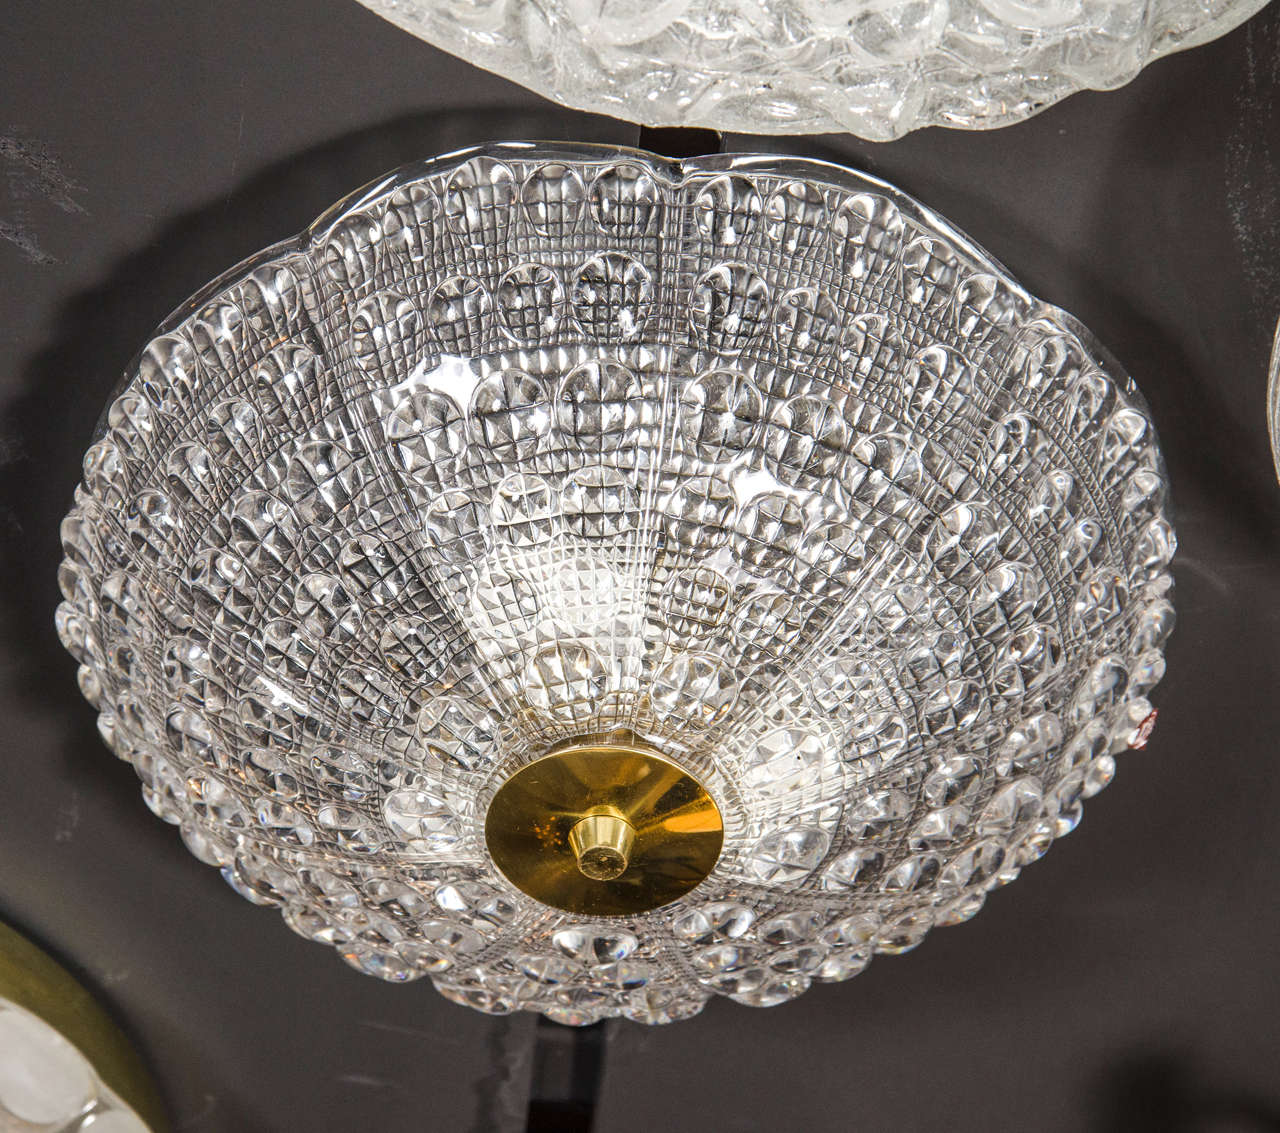 This elegant midcentury flushmount chandelier was designed by the legendary Carl Fagerlund for Orrefors in Sweden, circa 1960. It features a stunning pressed glass dome with a subtly scalloped top and a wealth of organic texture through with a